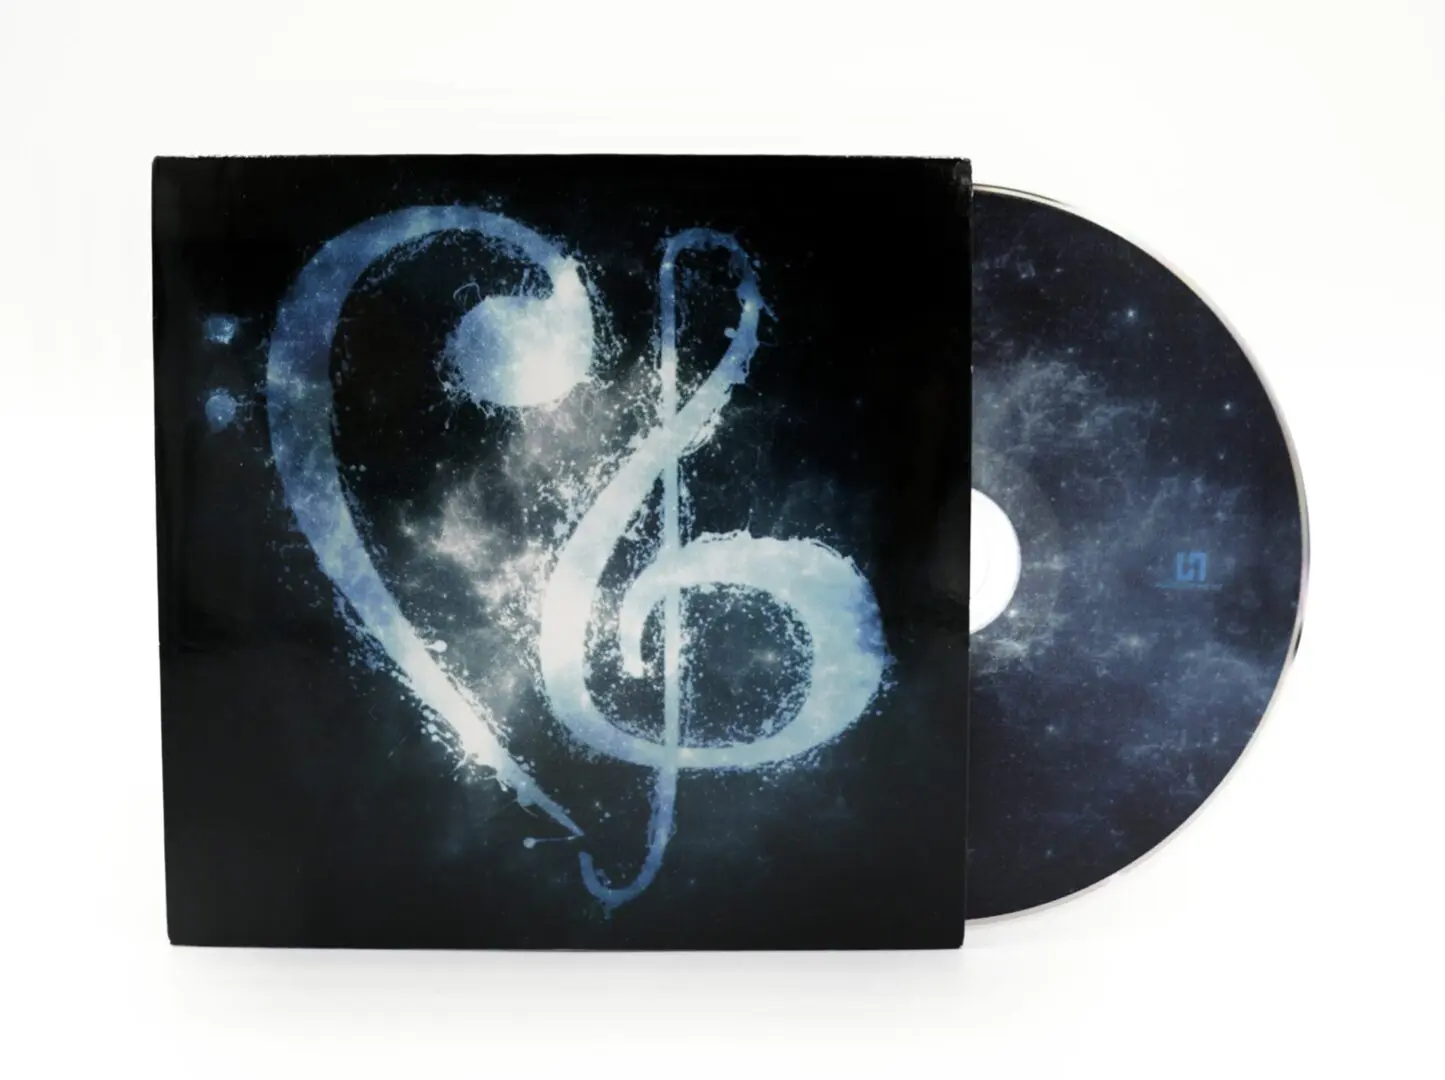 Album cover and CD of Christina Grimmie’s Side A